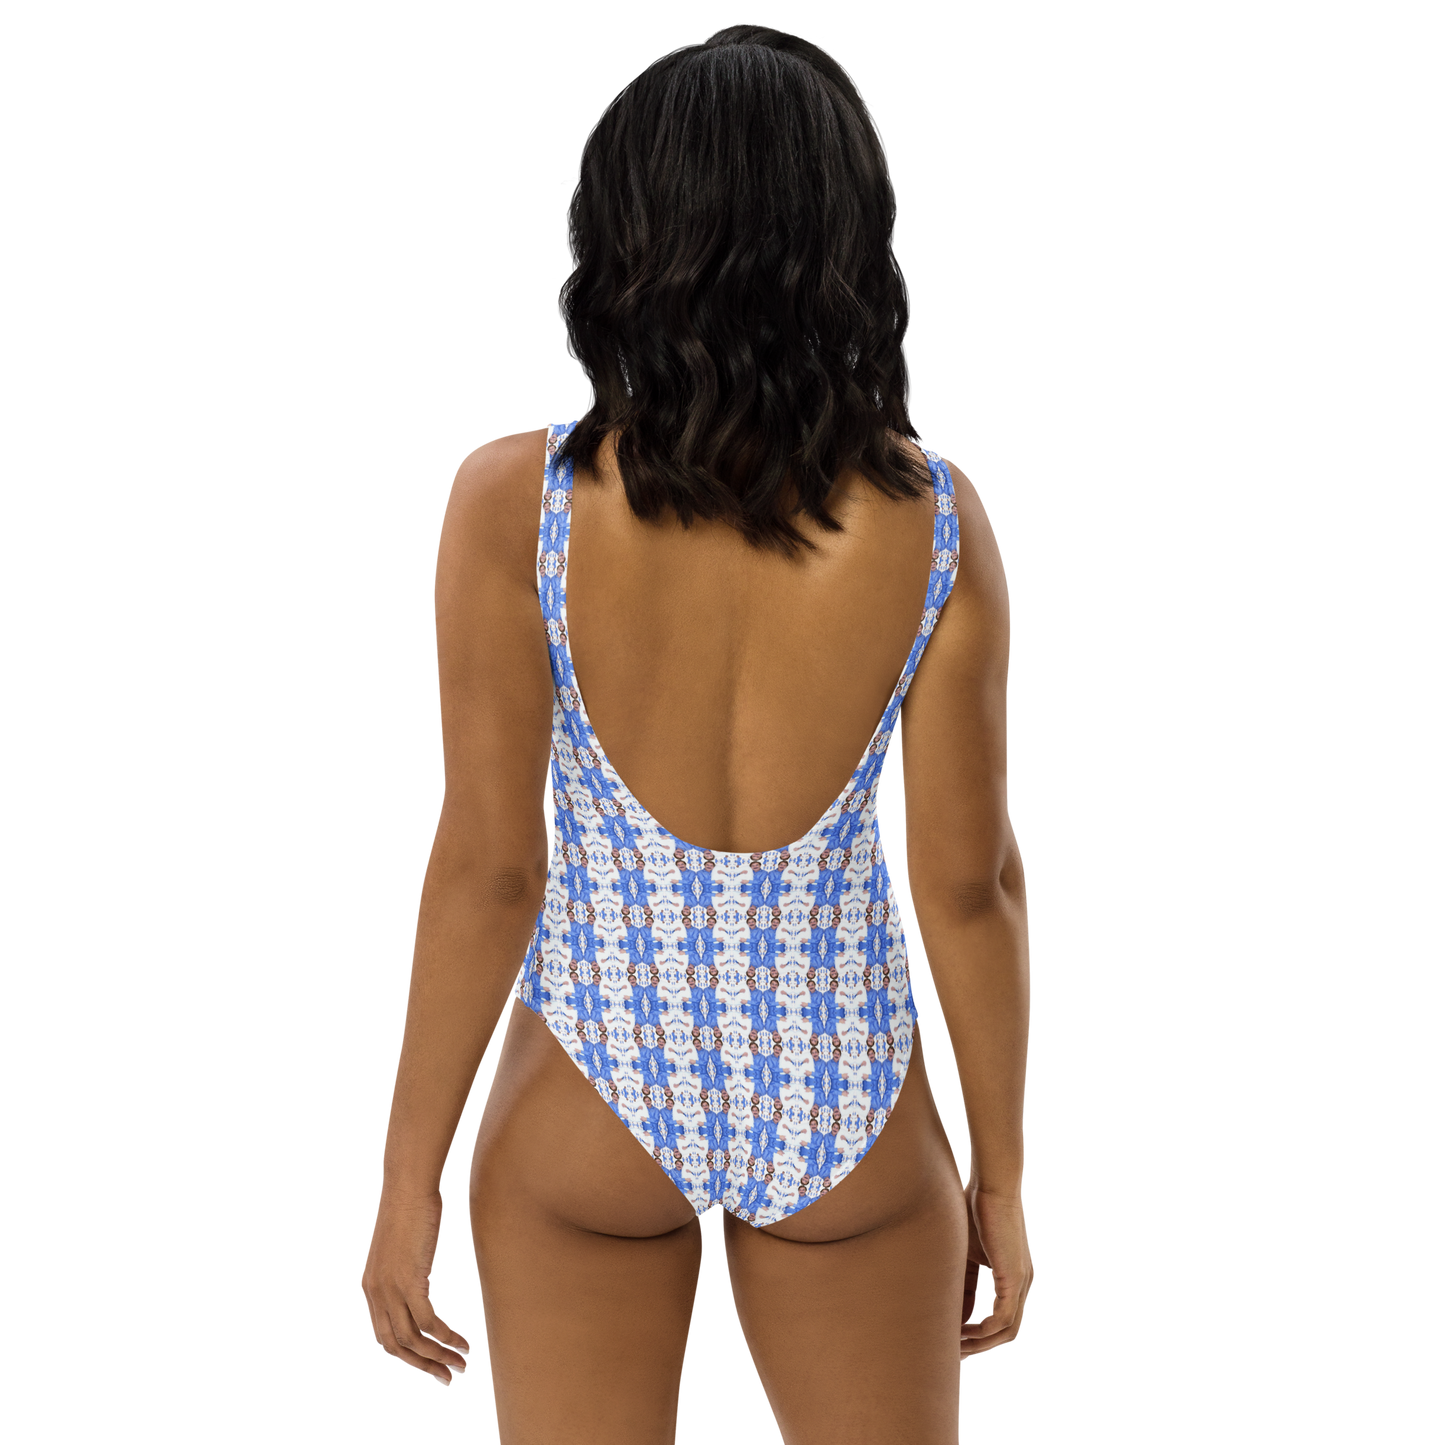 The Pillow Master Swimsuit